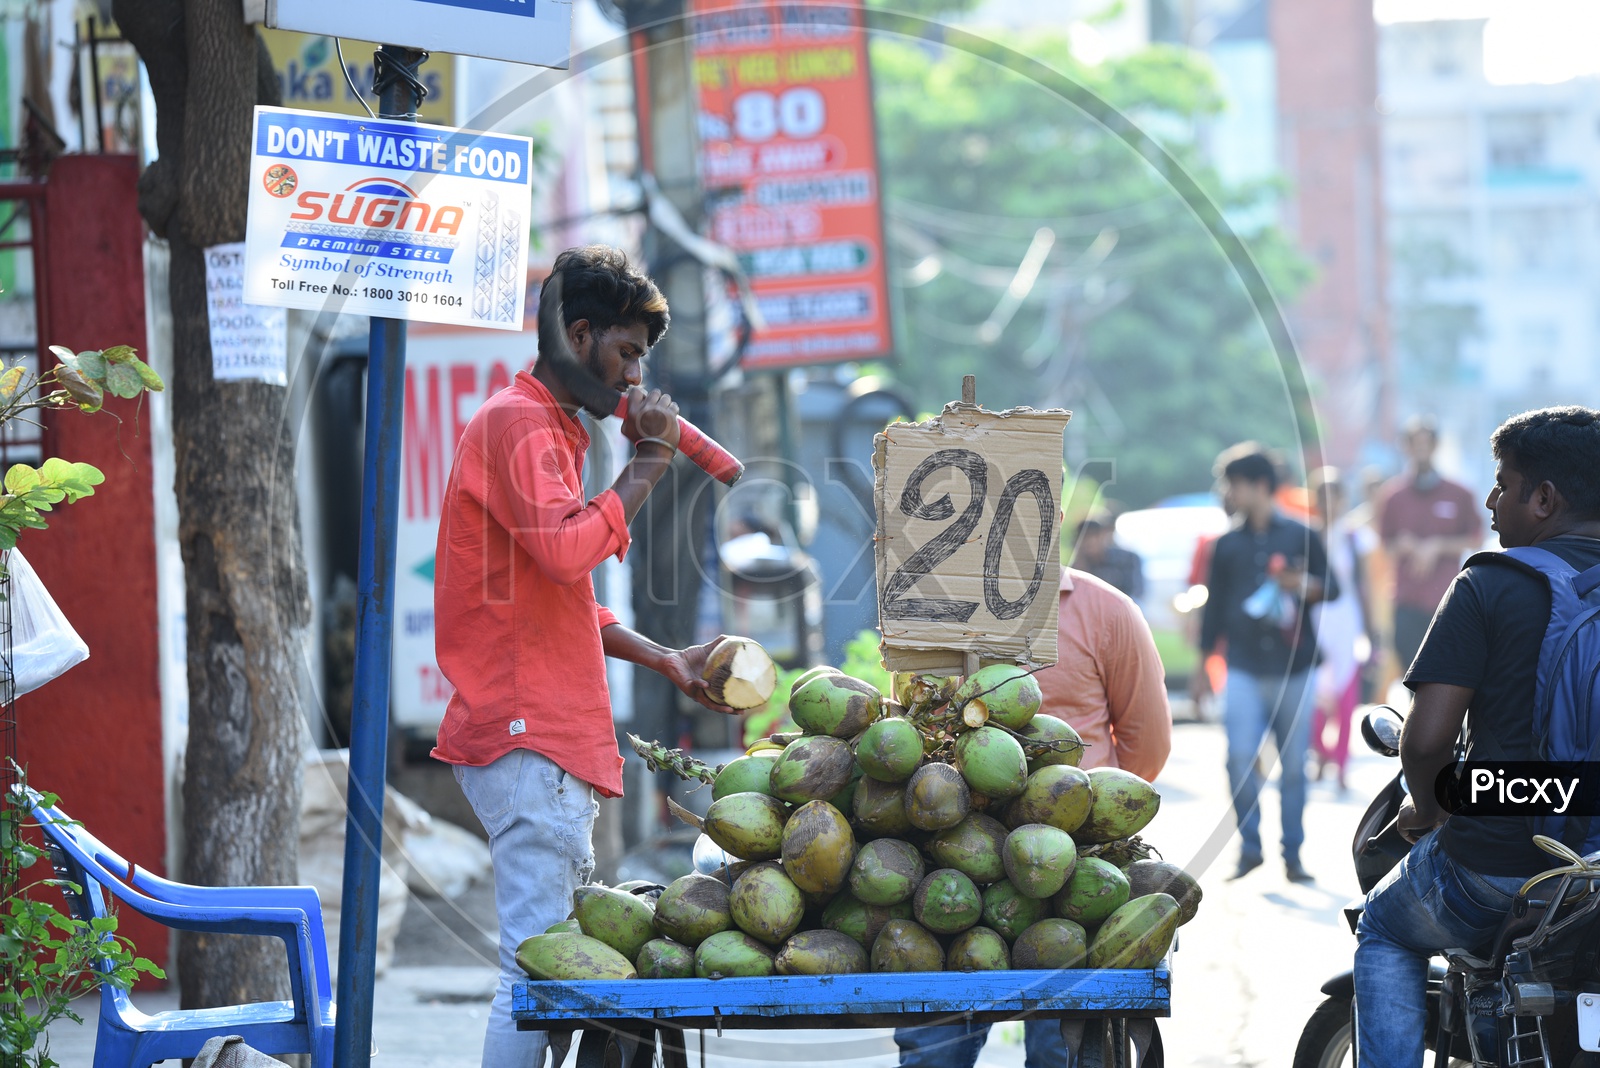 A Coconut Vendor Chopping Coconut At a Roadside Stall